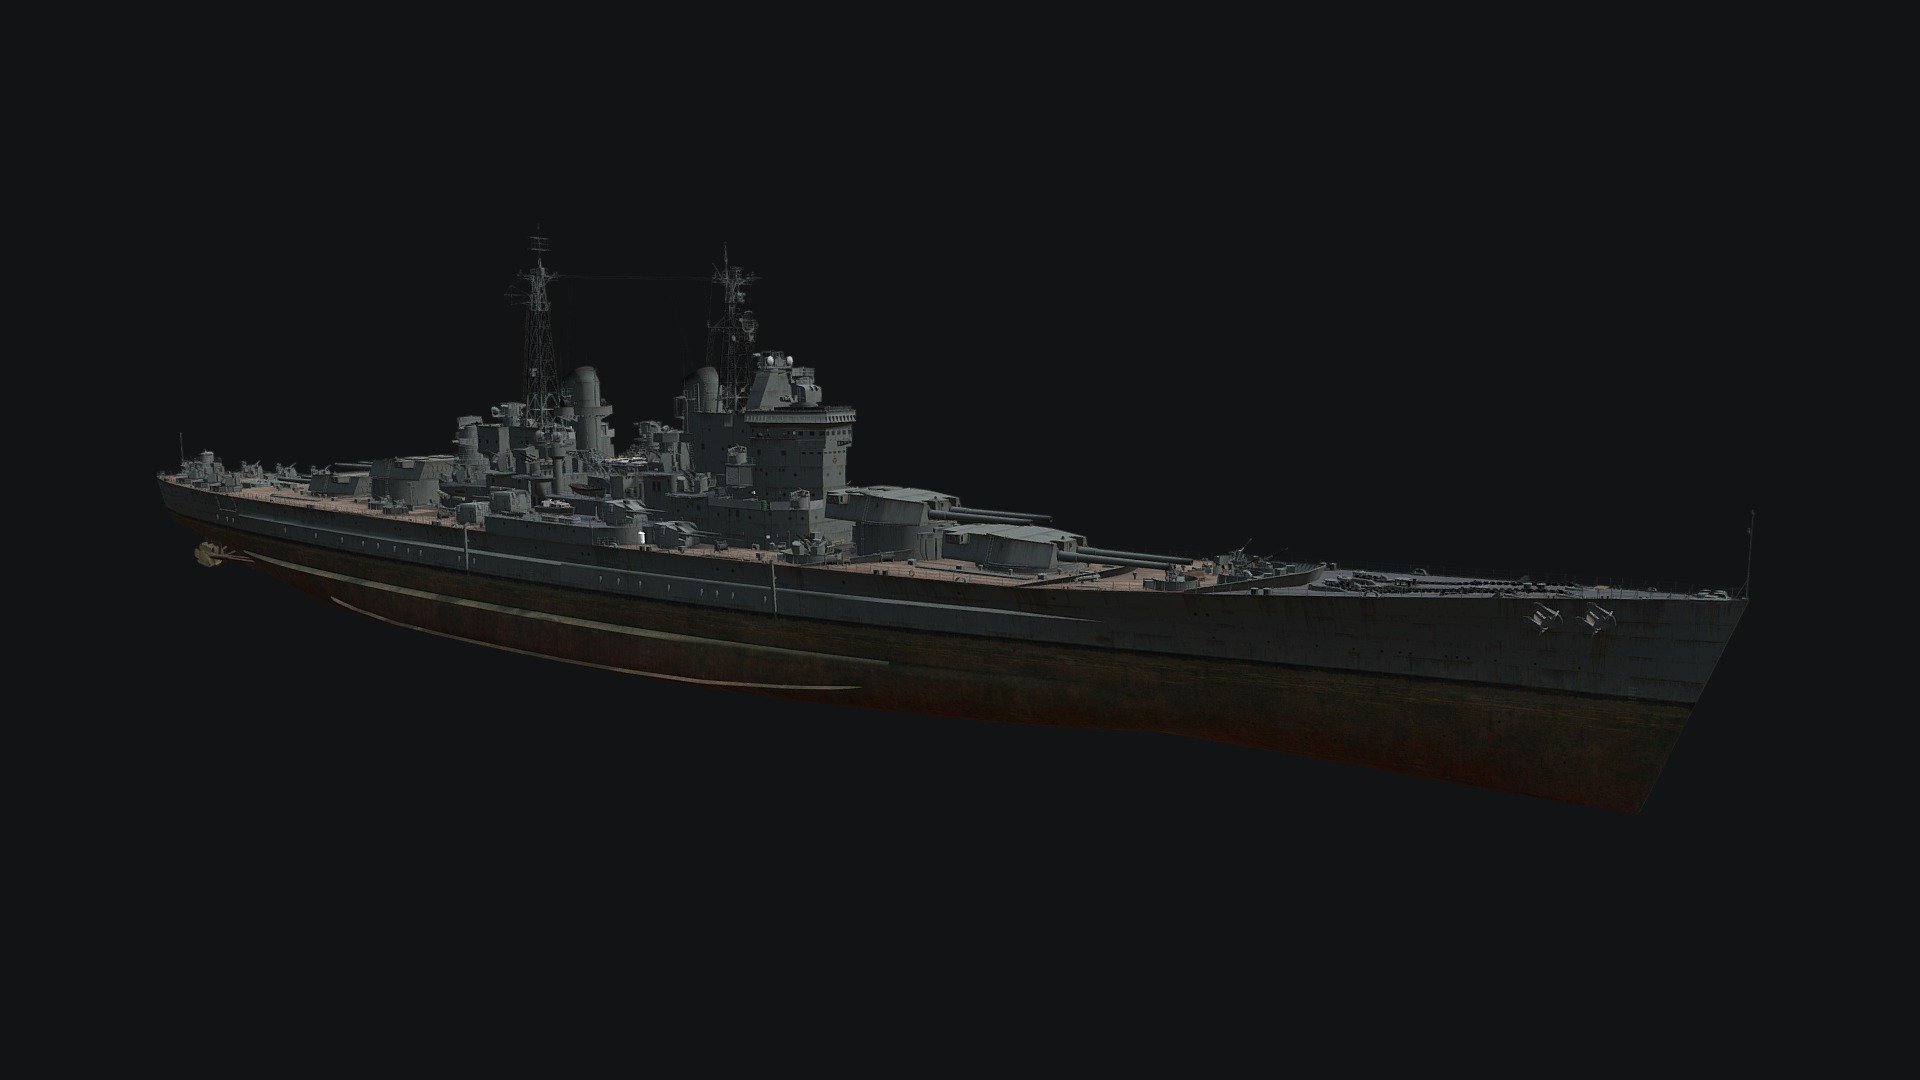 This model was developed by Wargaming for their popular game ‘World of Warships’. Play World of Warships now to send these ships into battle!

Use the following link to start playing!

https://worldofwarships.com/

Thunderer — British special premium Tier X battleship.

After Vanguard was laid down, the further development of British cruisers was aimed at increasing their dimensions. Among the options was a project with 457 mm guns that had been developed after World War I for battleships and battlecruisers of projects N and G 3d model